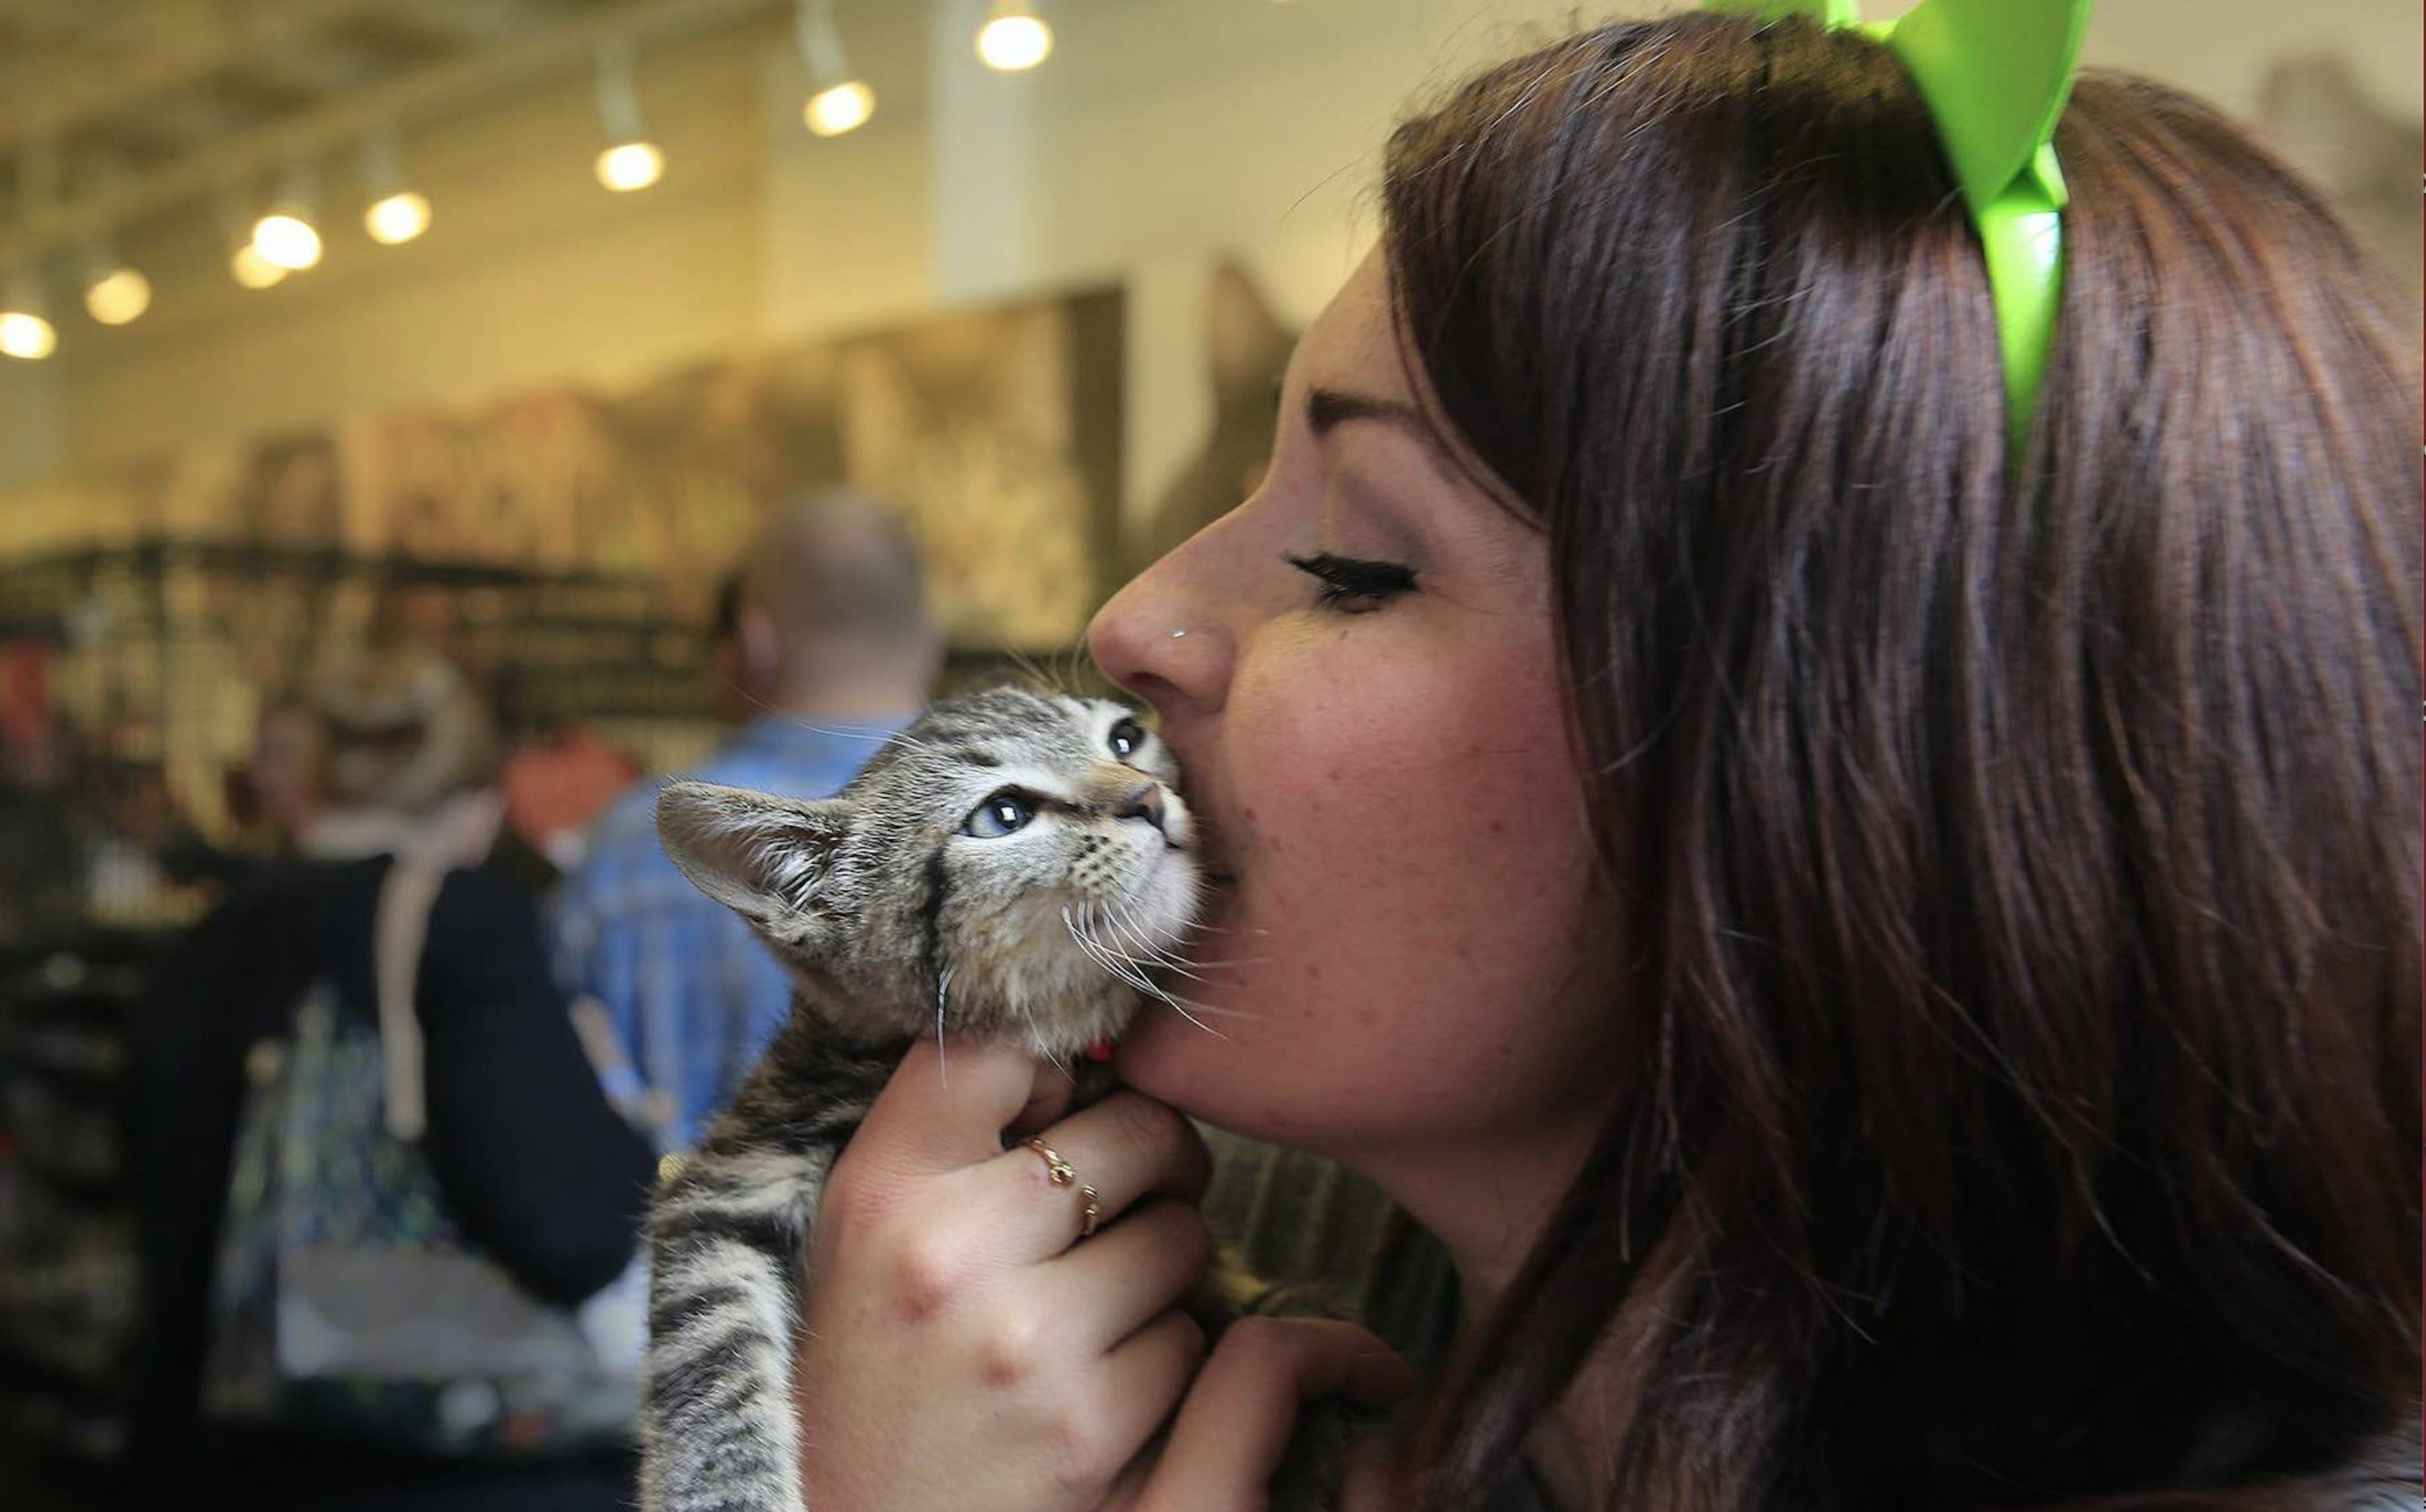 A new adoptee at the 2015 CatConLA event.